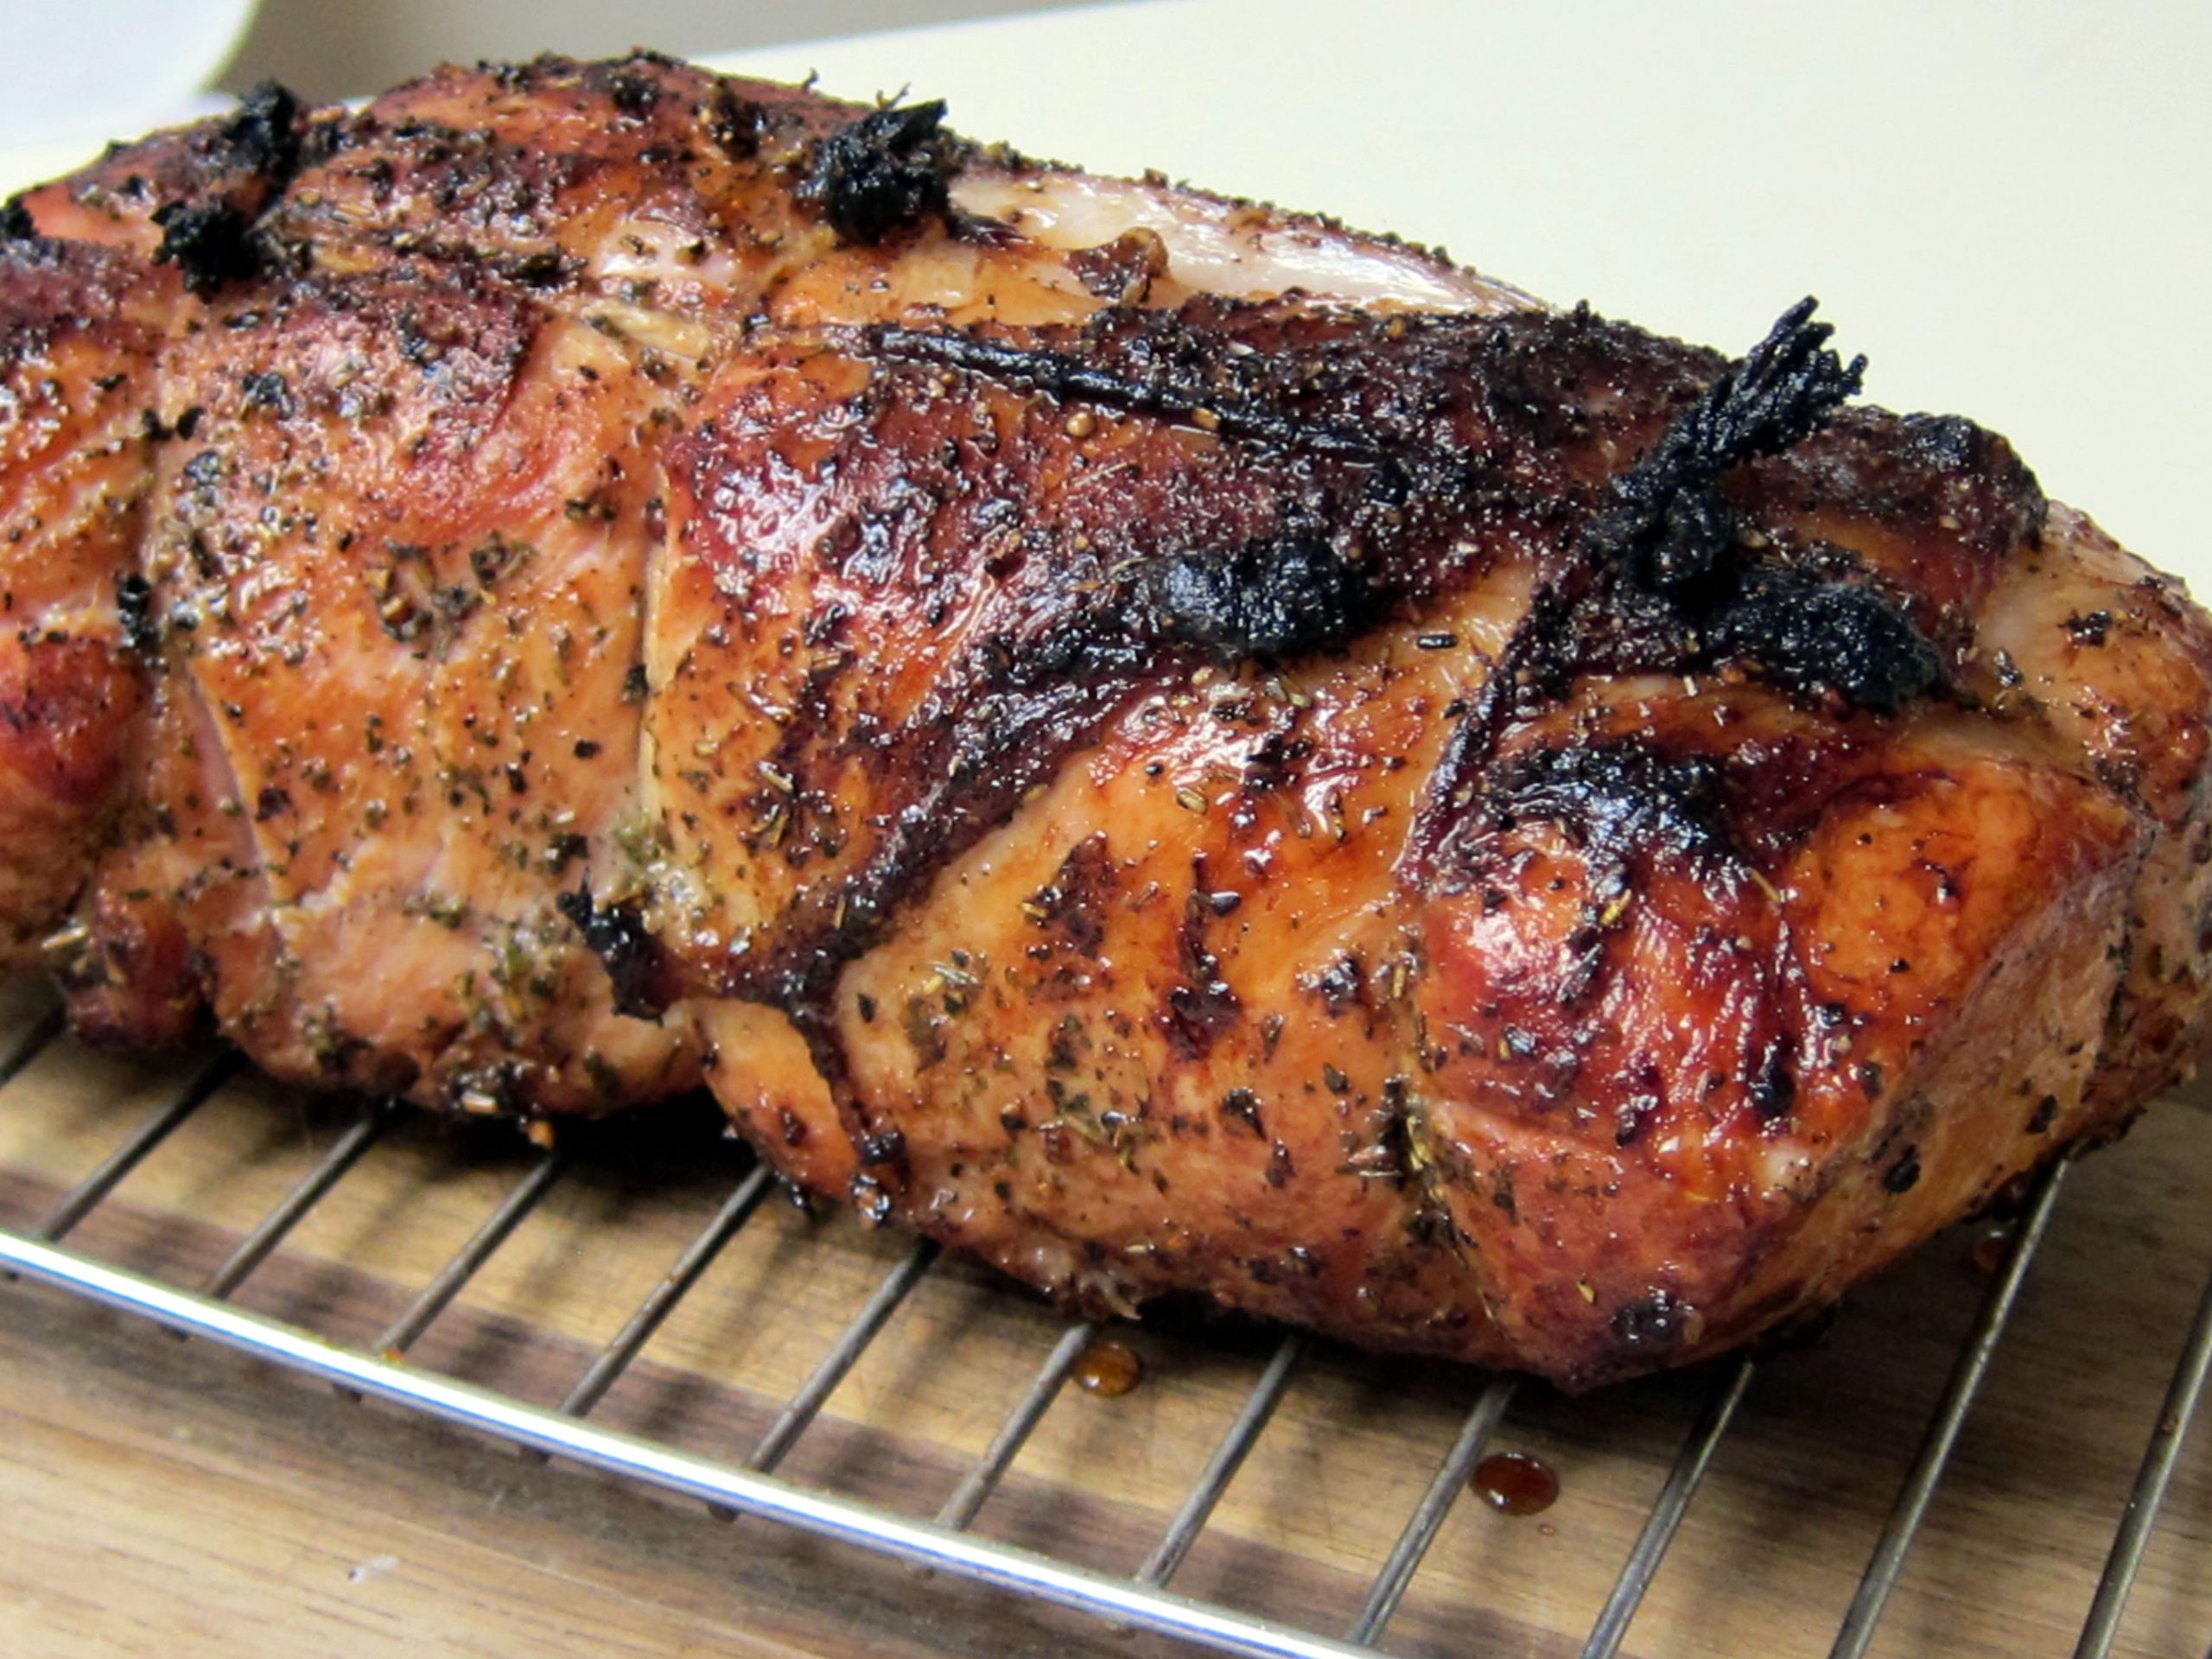 Cooking Pork Loin On Grill
 Recipe of the Week – Grilled Pork Roast